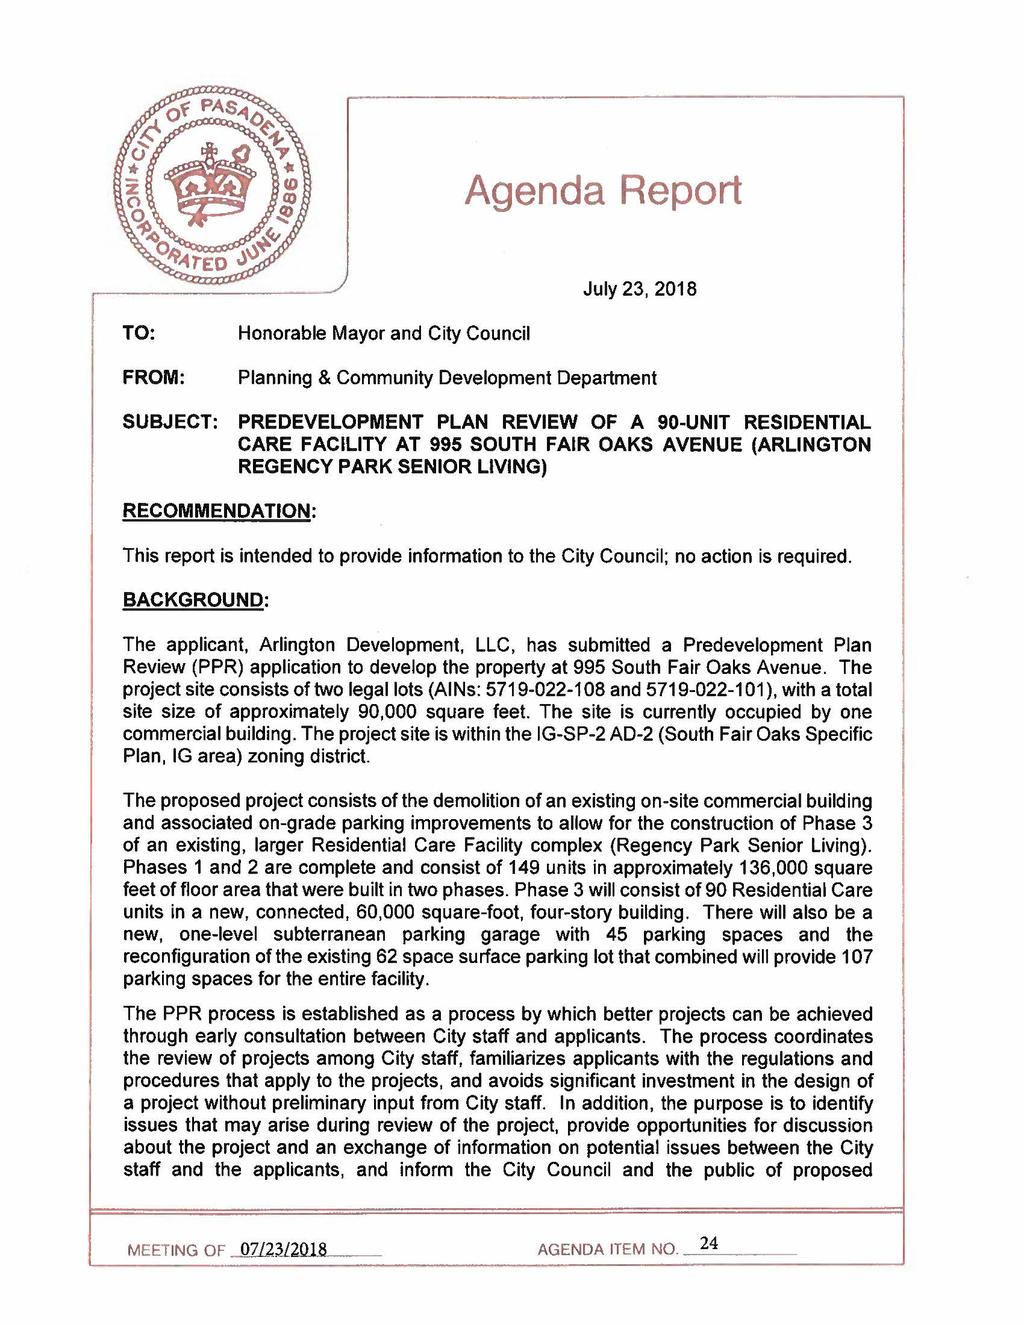 Agenda Report TO: FROM: SUBJECT: Honorable Mayor and Cty Councl Plannng & Communty Development Department PREDEVELOPMENT PLAN REVEW OF A 90-UNT RESDENTAL CARE FACLTY AT 995 SOUTH FAR OAKS AVENUE